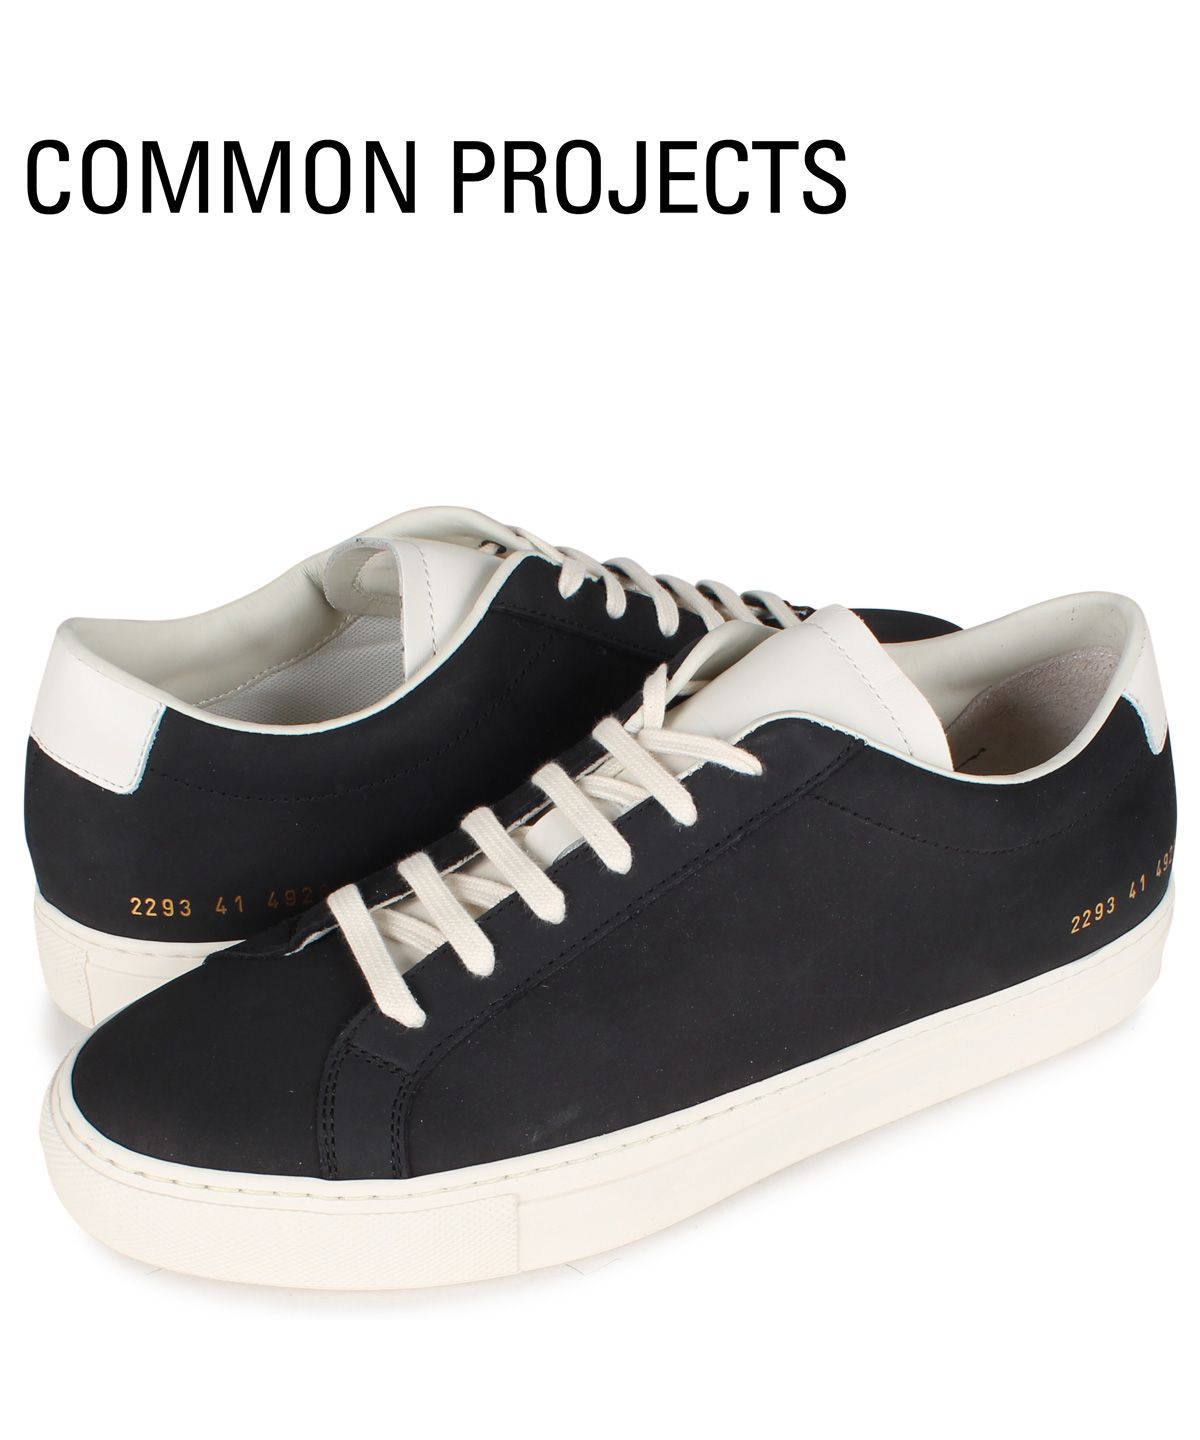 Common Projects Achilles 41 期間限定 - スニーカー